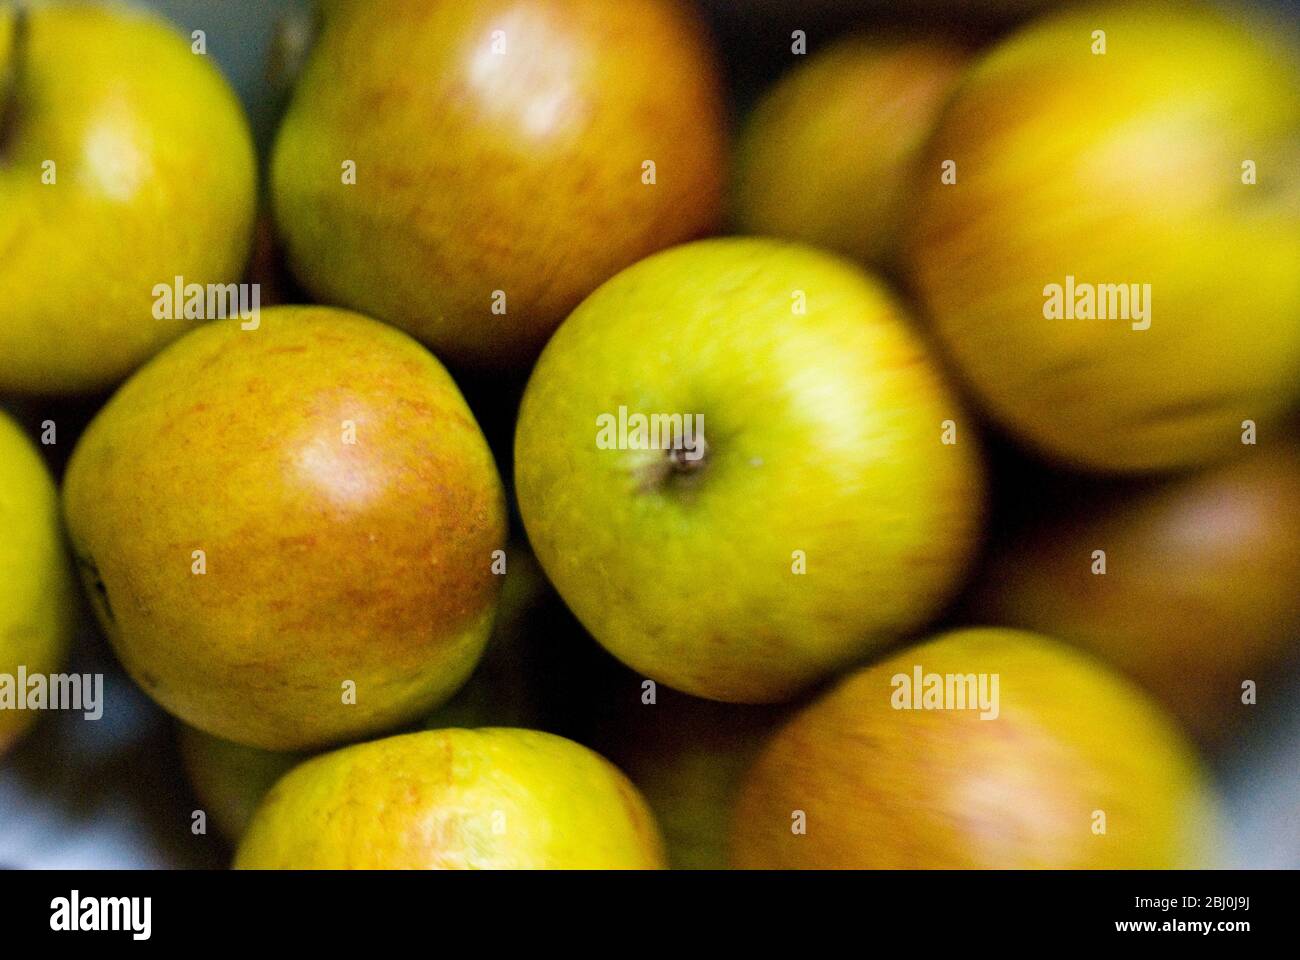 Massed Cox's apples ahot with a lensbaby lens for blurred edge effect - Stock Photo